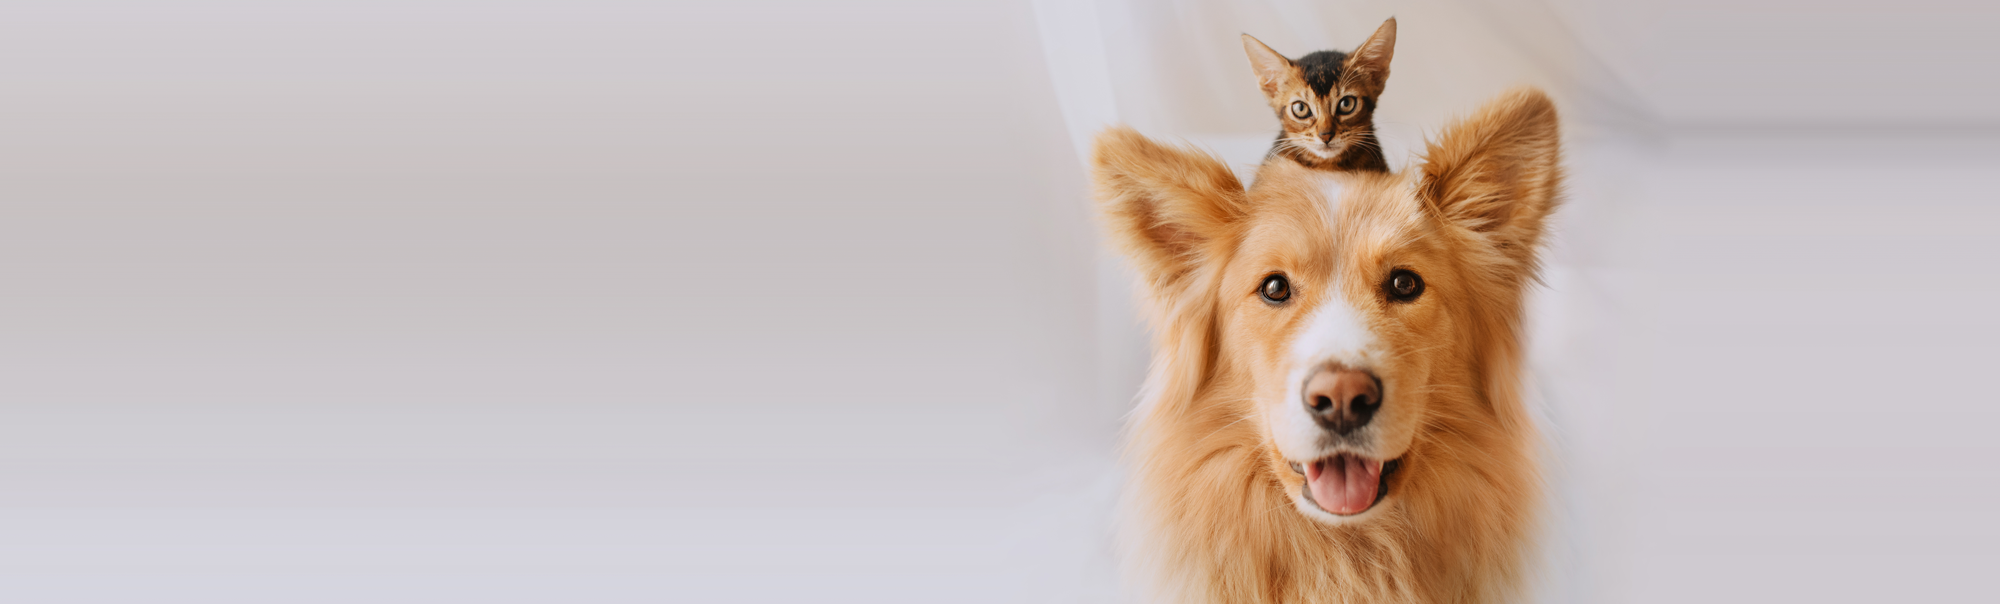 Cat and Dog Posing Together